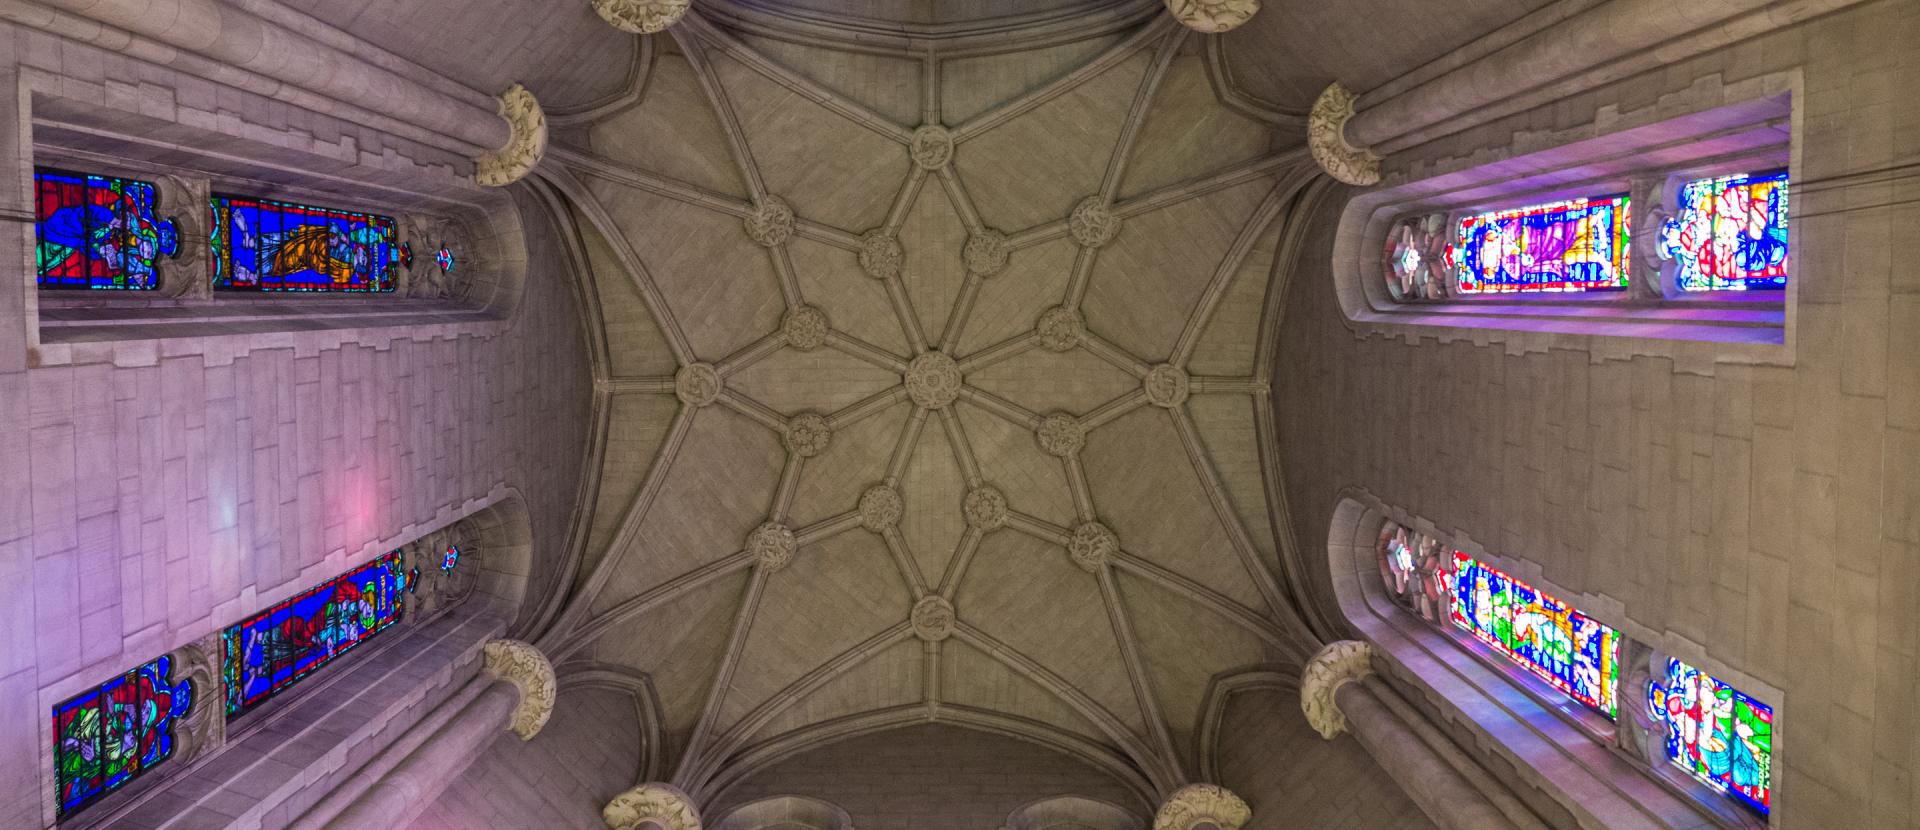 View of the top inside of Duke Chapel.